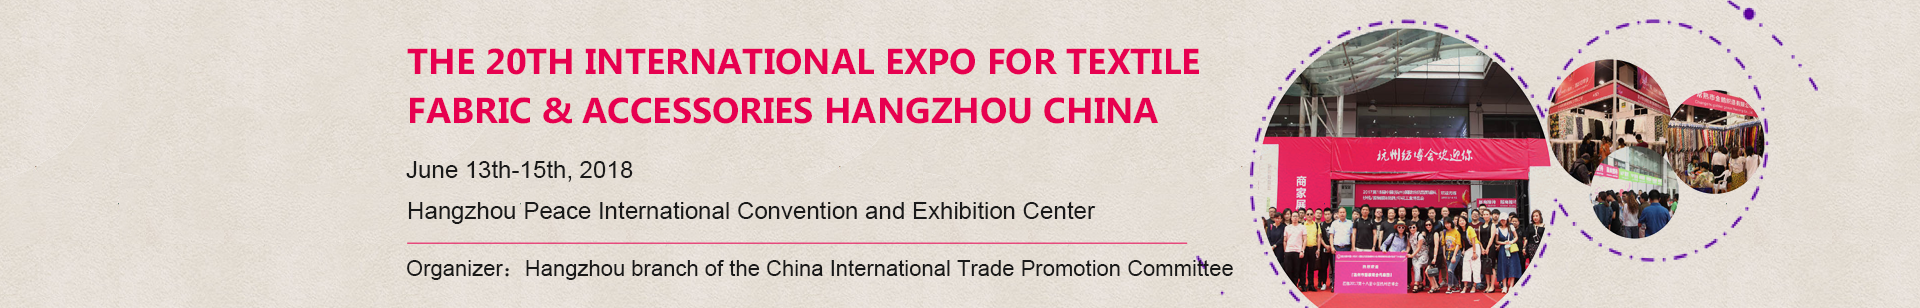 The International Expo for Textile Fabric&Accessories Hangzhou